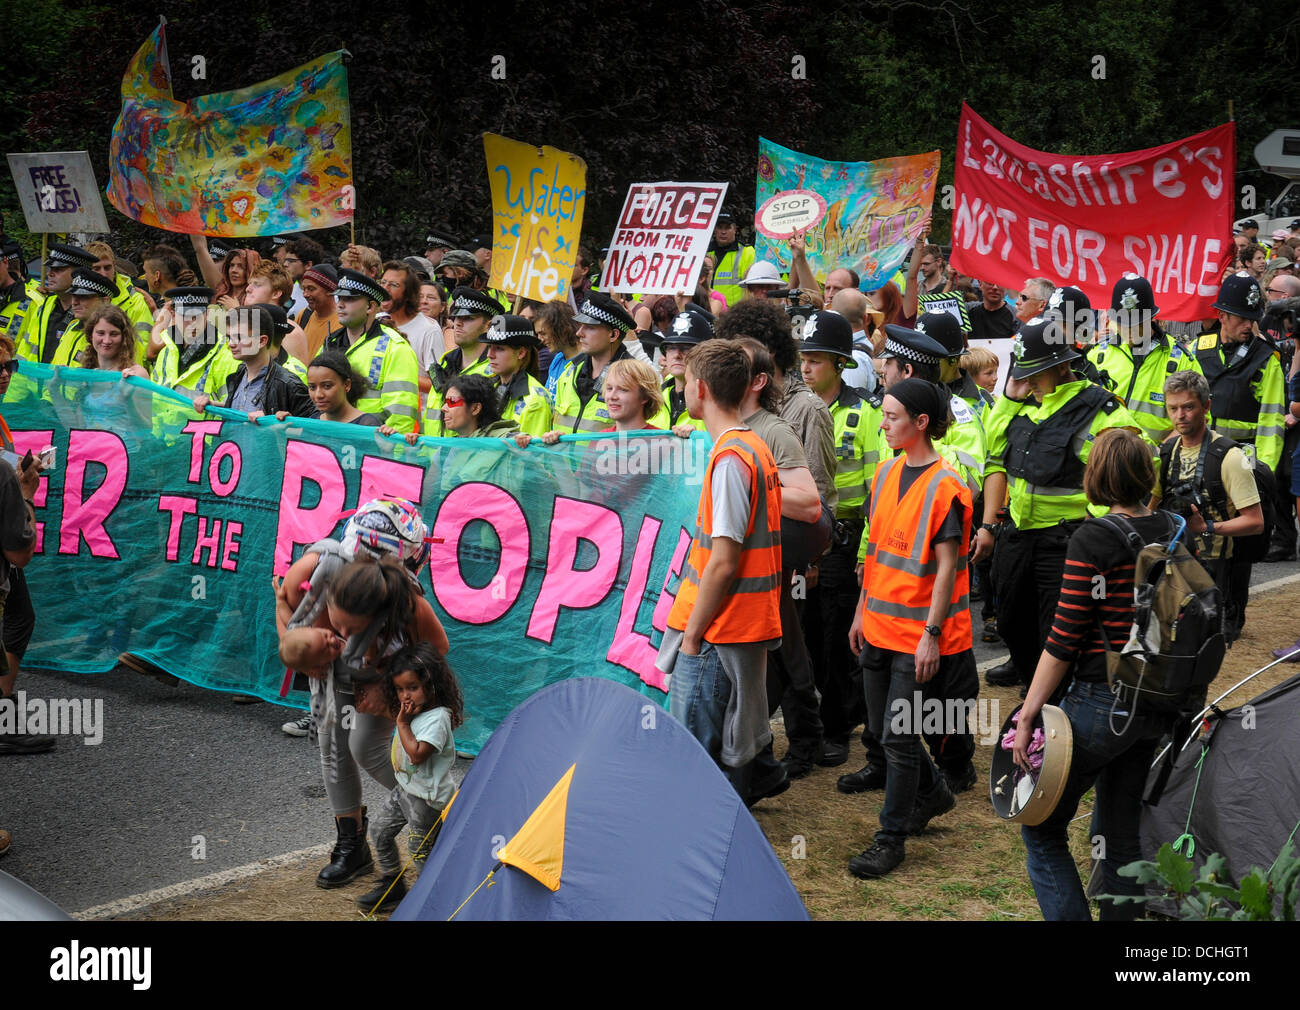 Balcombe, West Sussex, UK. 18th Aug, 2013. Balcombe, West Sussex, UK. 18th Aug, 2013. Power to the people. Environmental protesters including mothers with babes in arms parade toward Cuadrilla drilling site entrance at Balcombe © David Burr/Alamy Live News Stock Photo